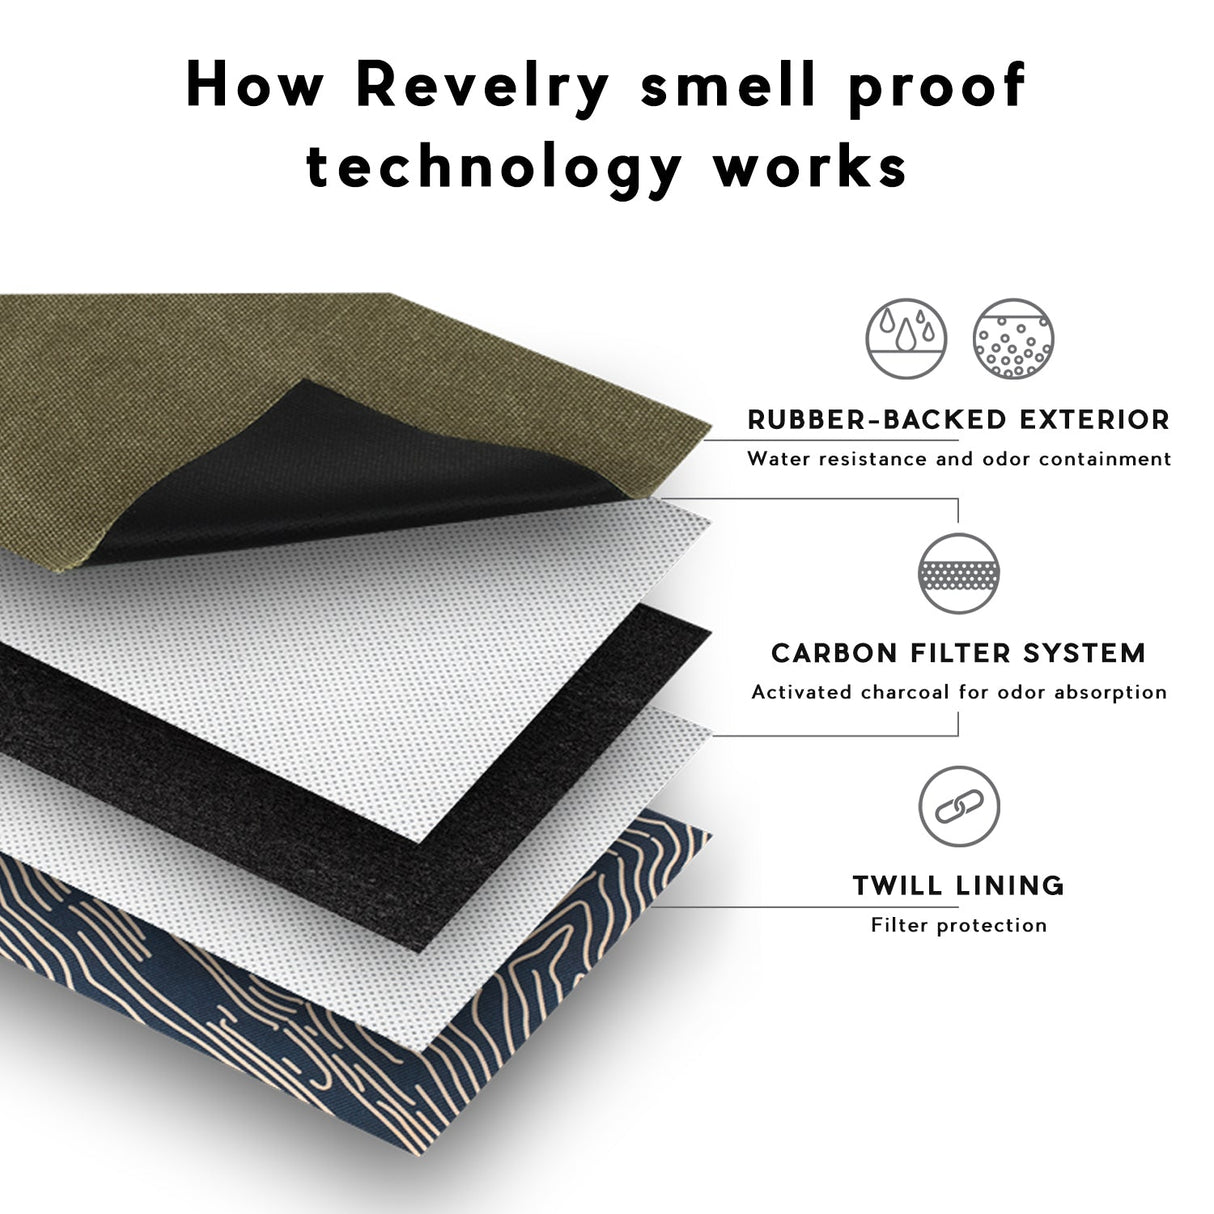 Revelry Supply Pipe Kit layers demonstrating smell proof technology with rubber exterior and carbon filter